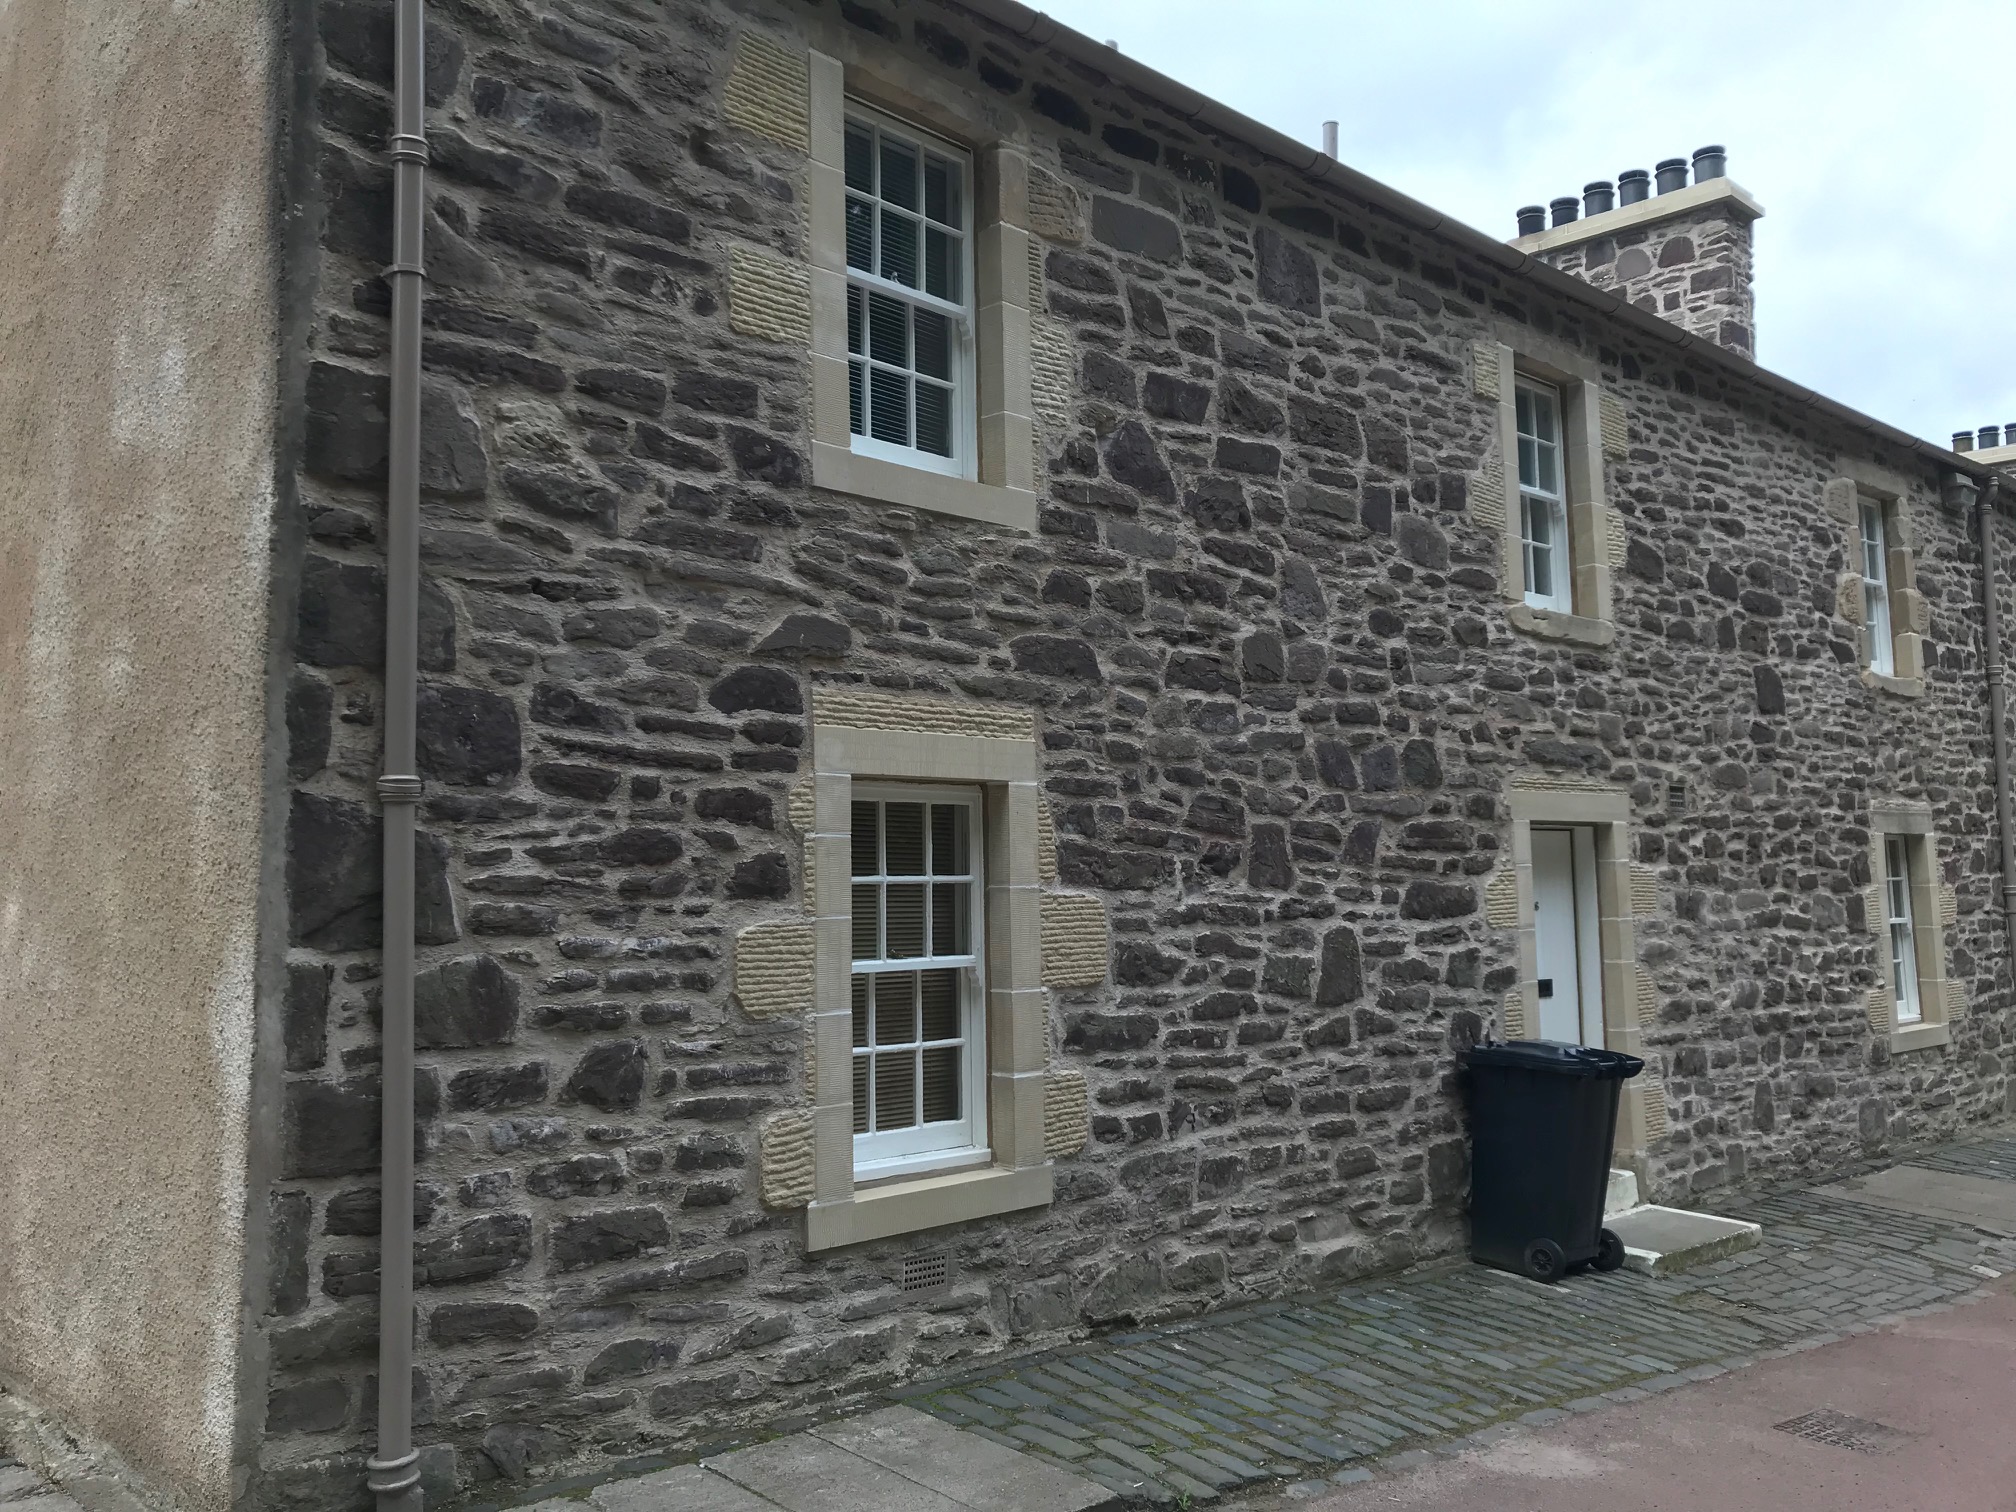 Report outlines future options for housing in New Lanark